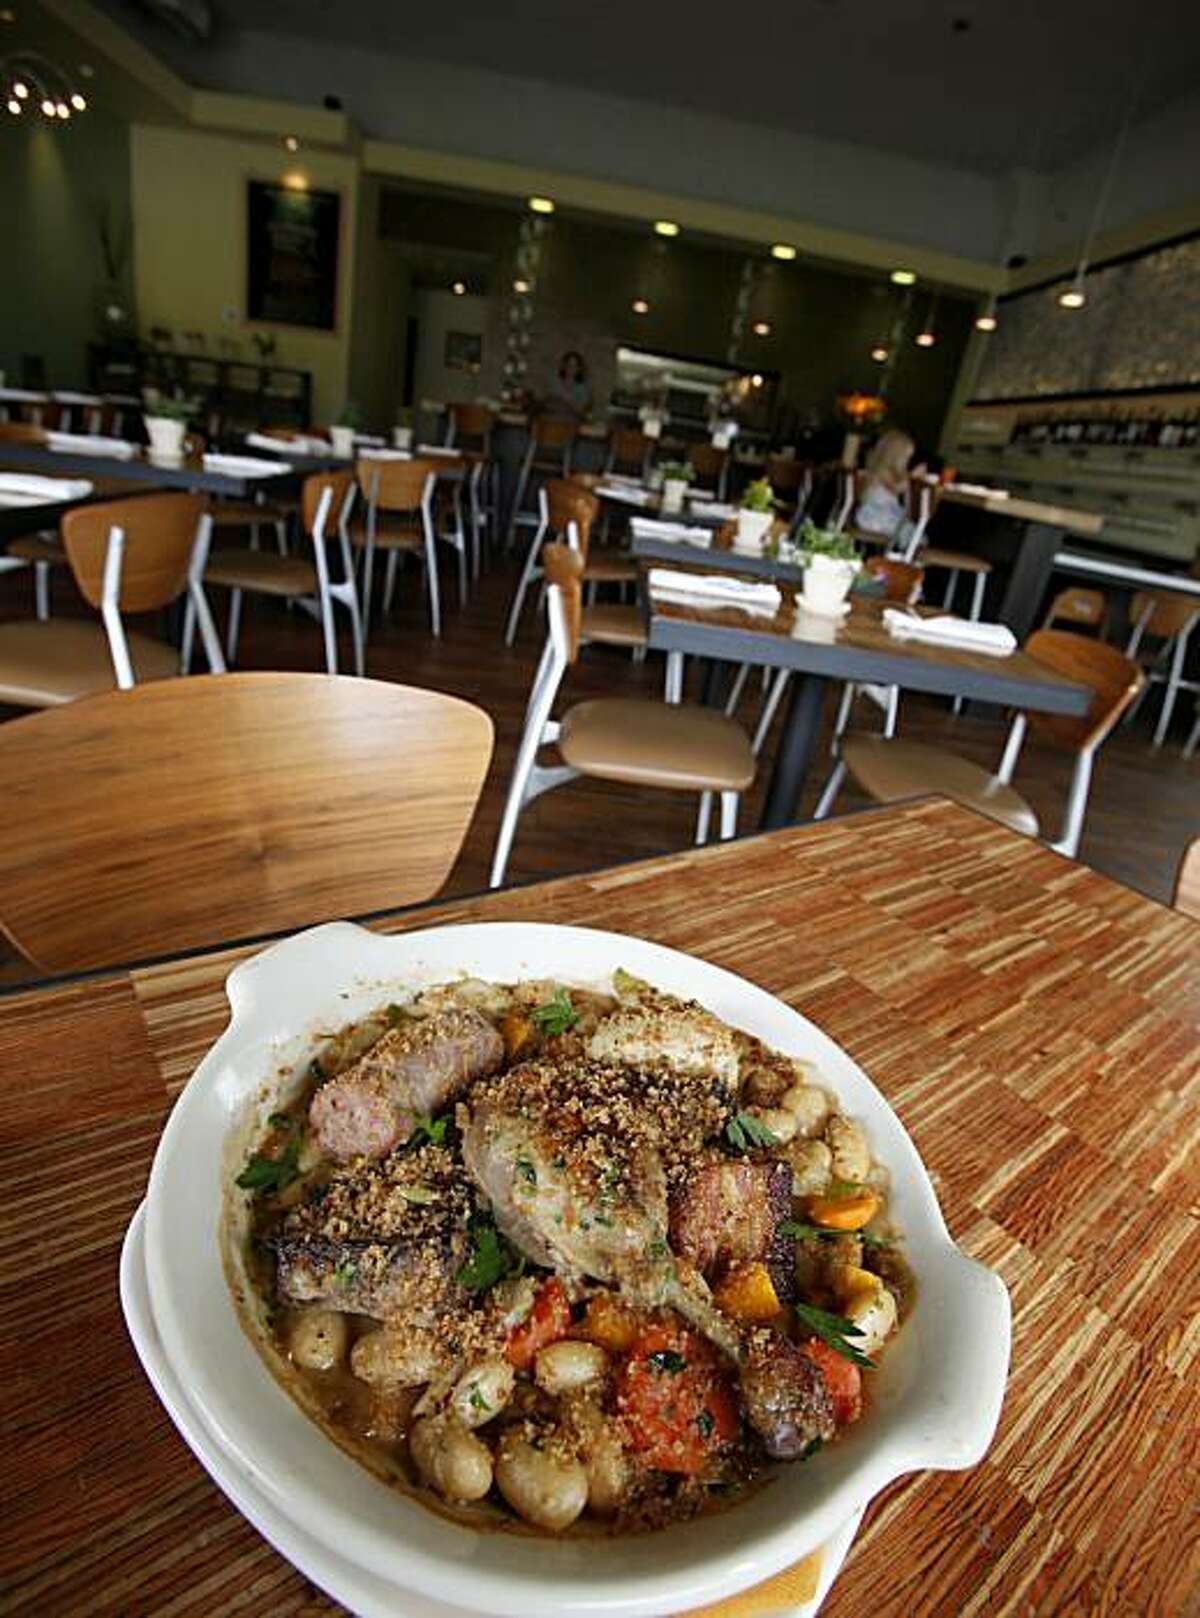 The cassoulet is a delicious French stew dish. Grace's Table in downtown Napa, Calif. is a popular eatery with a unique European style seating looking right out on Second Street.